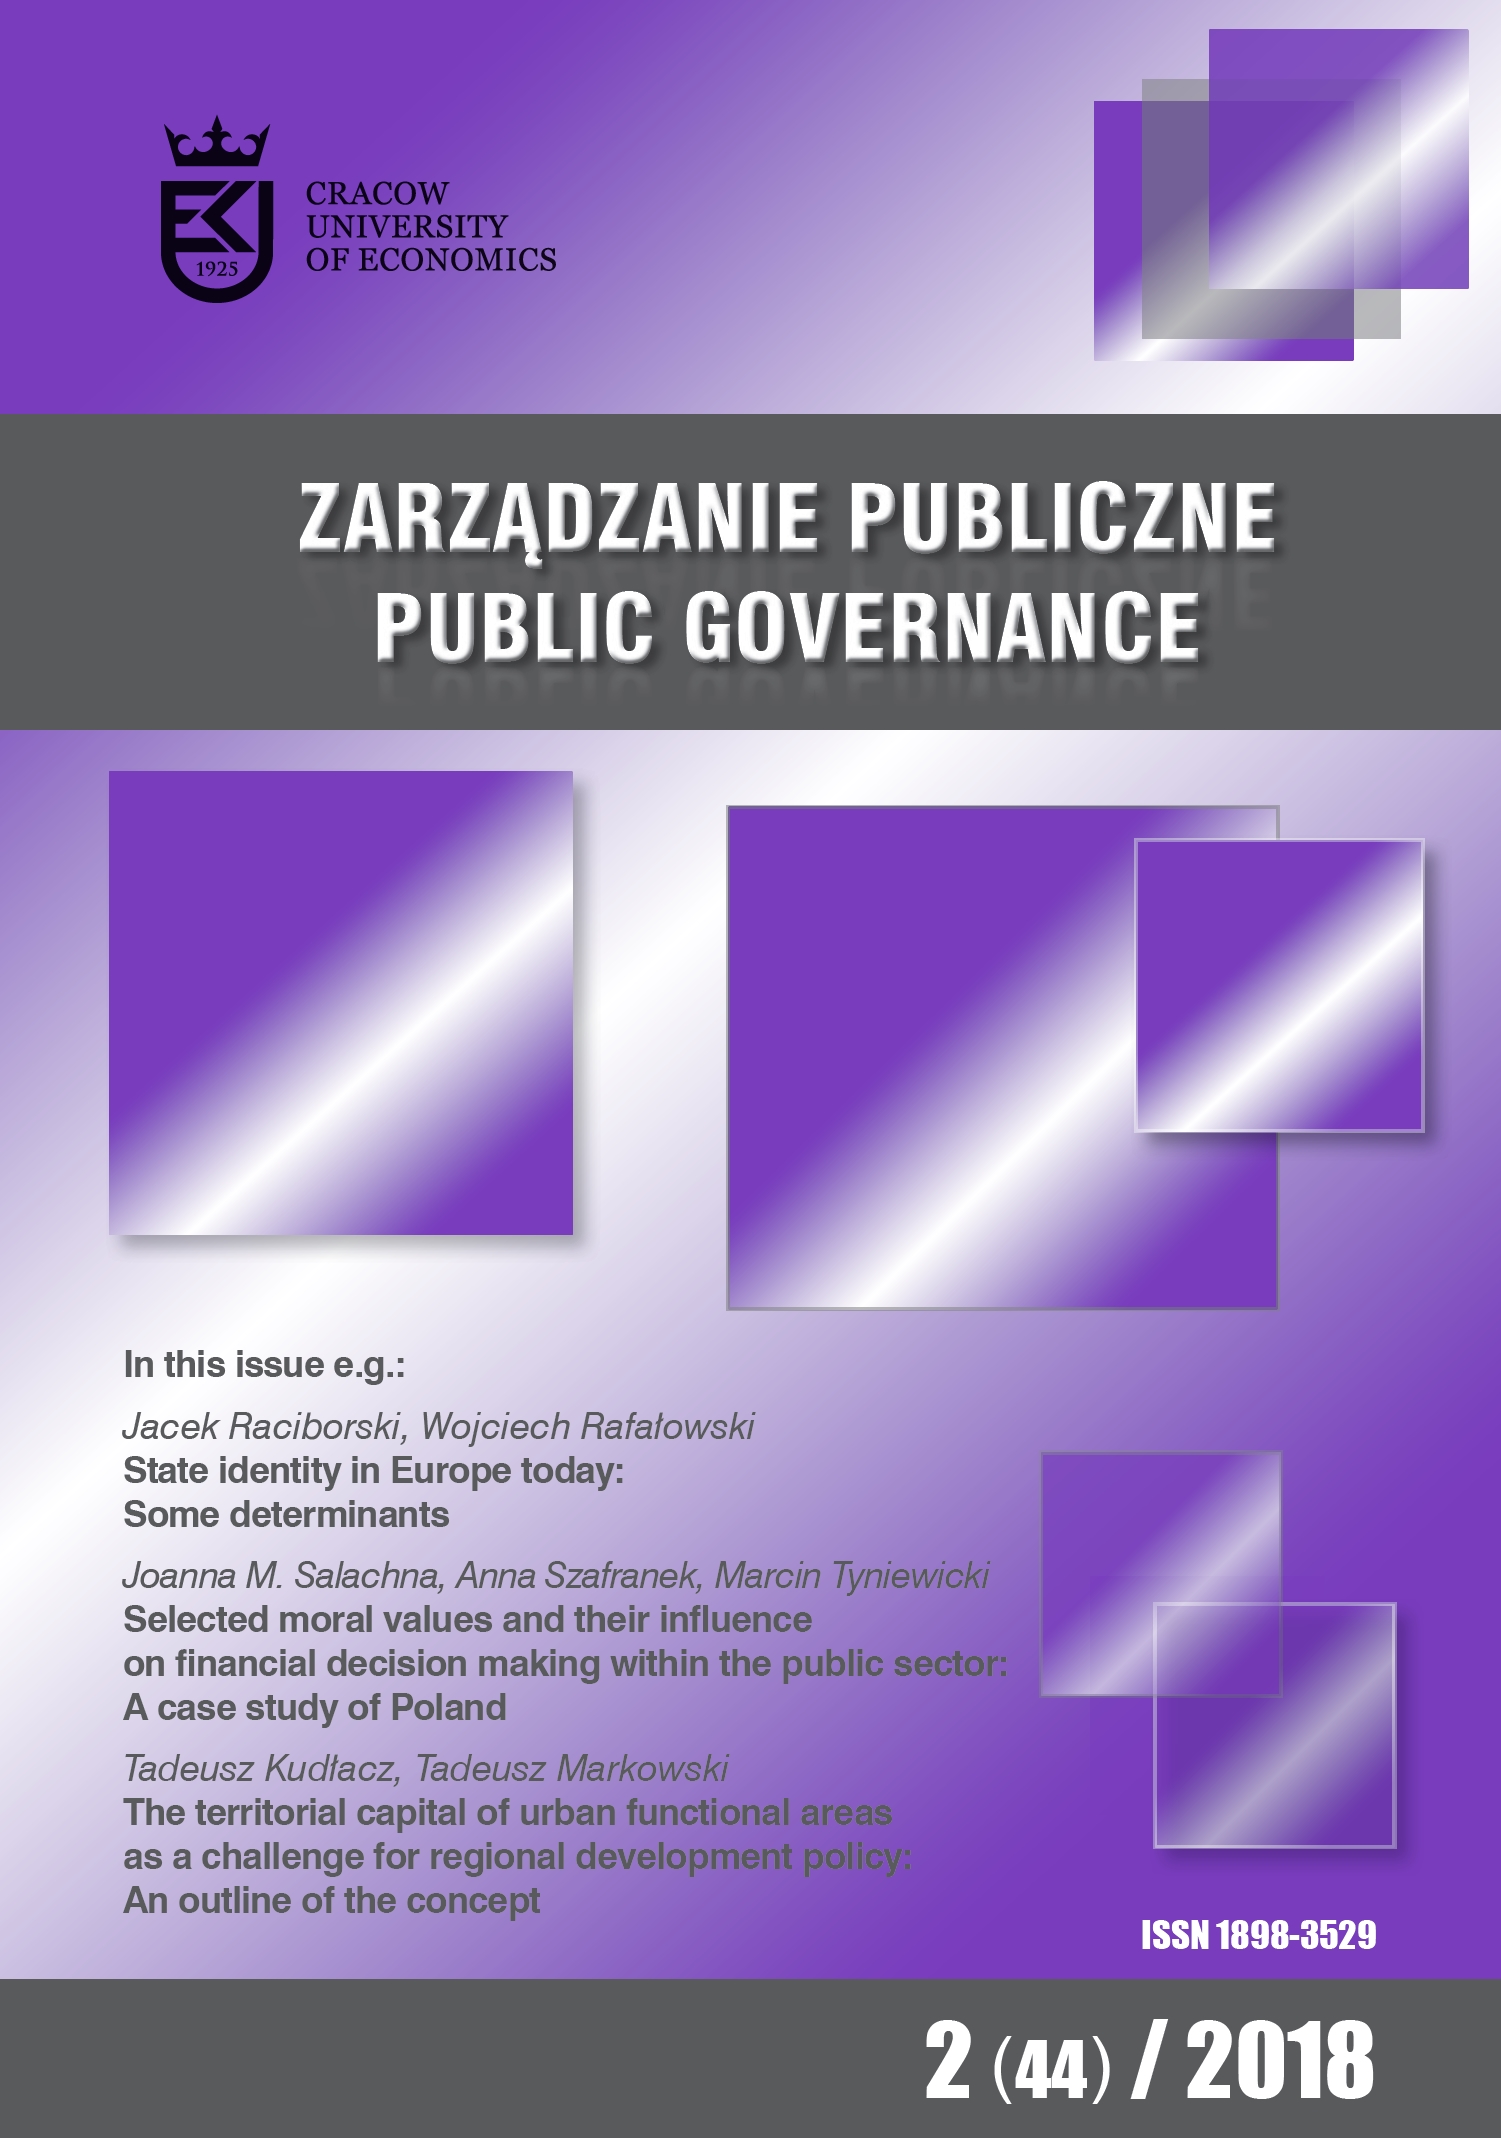 Selected moral values and their influence on financial decision making within the public sector: A case study of Poland